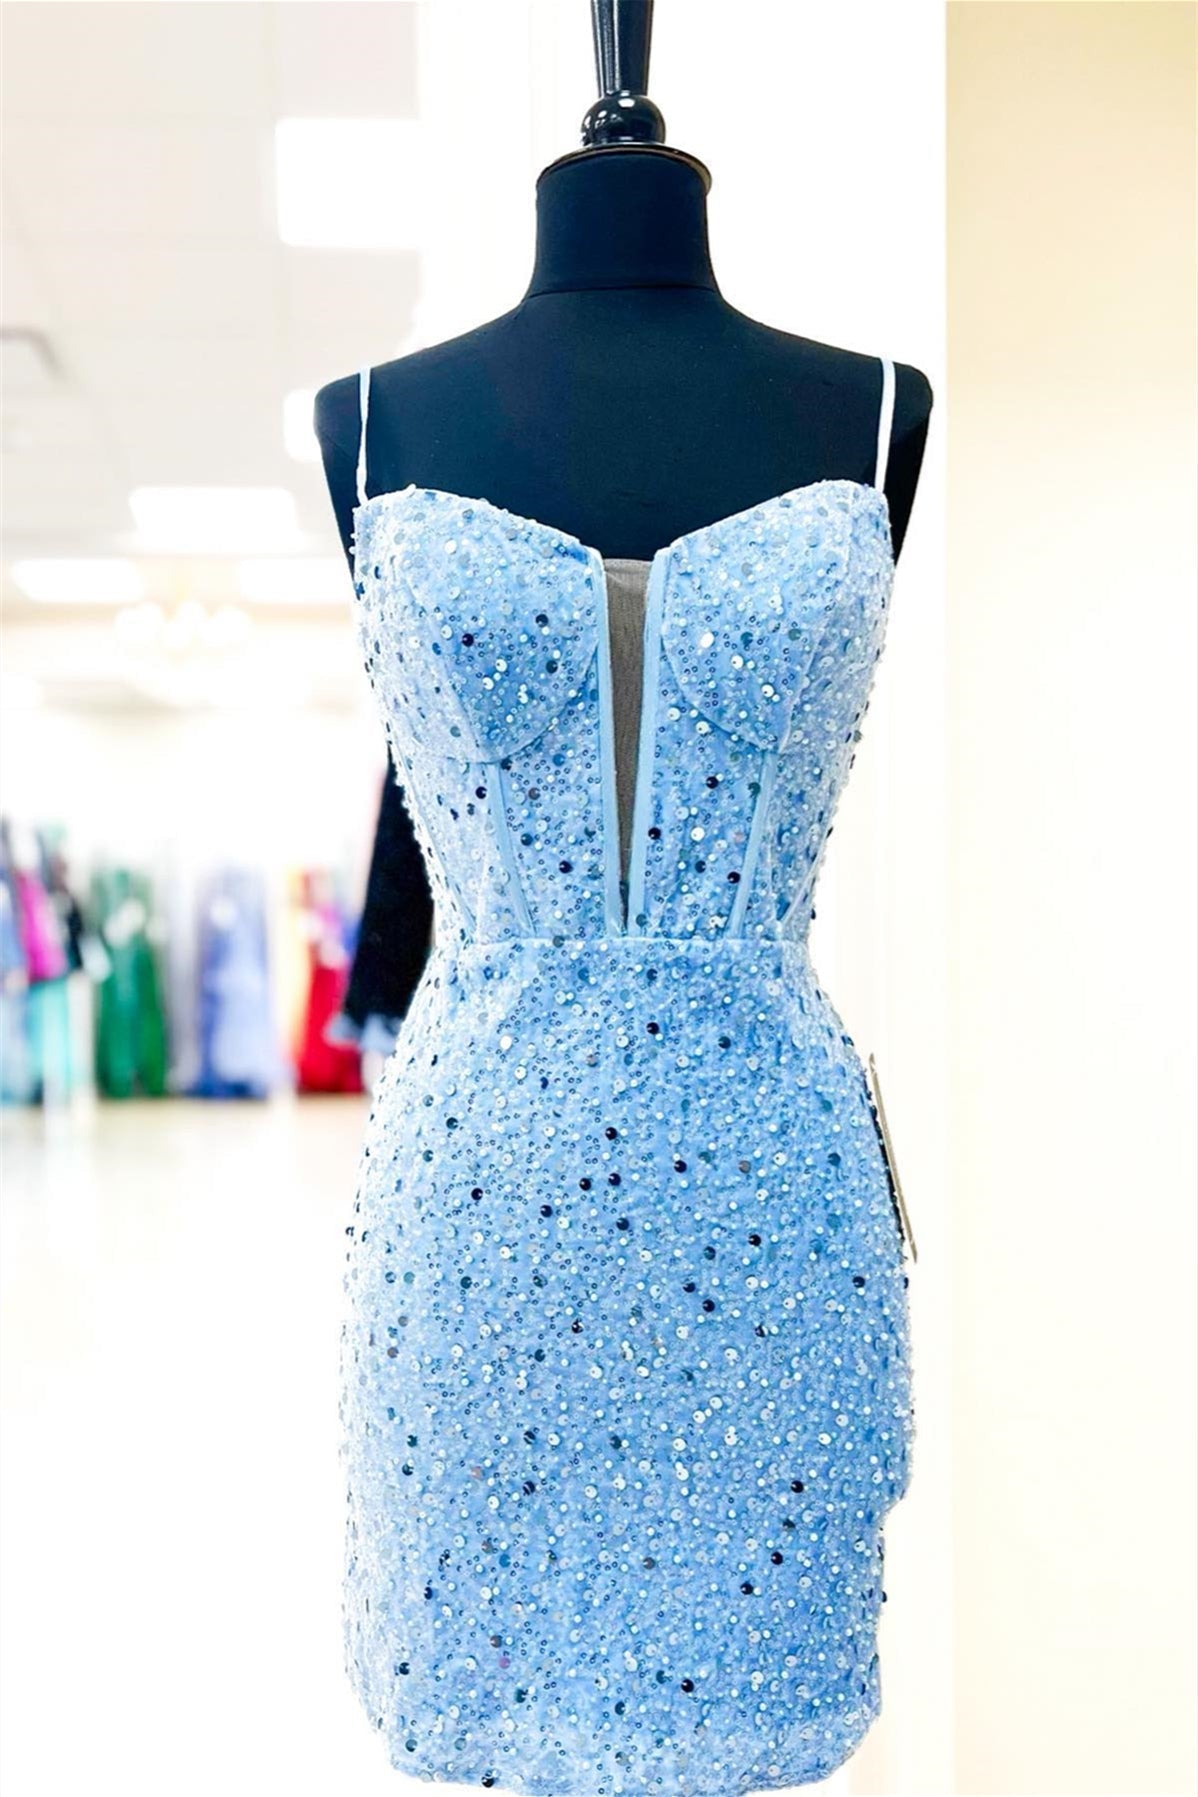 Light Blue Straps Sheath Beaded Sequined Cocktail Dresses Wedding Outfits, Wedding Dress Outfits